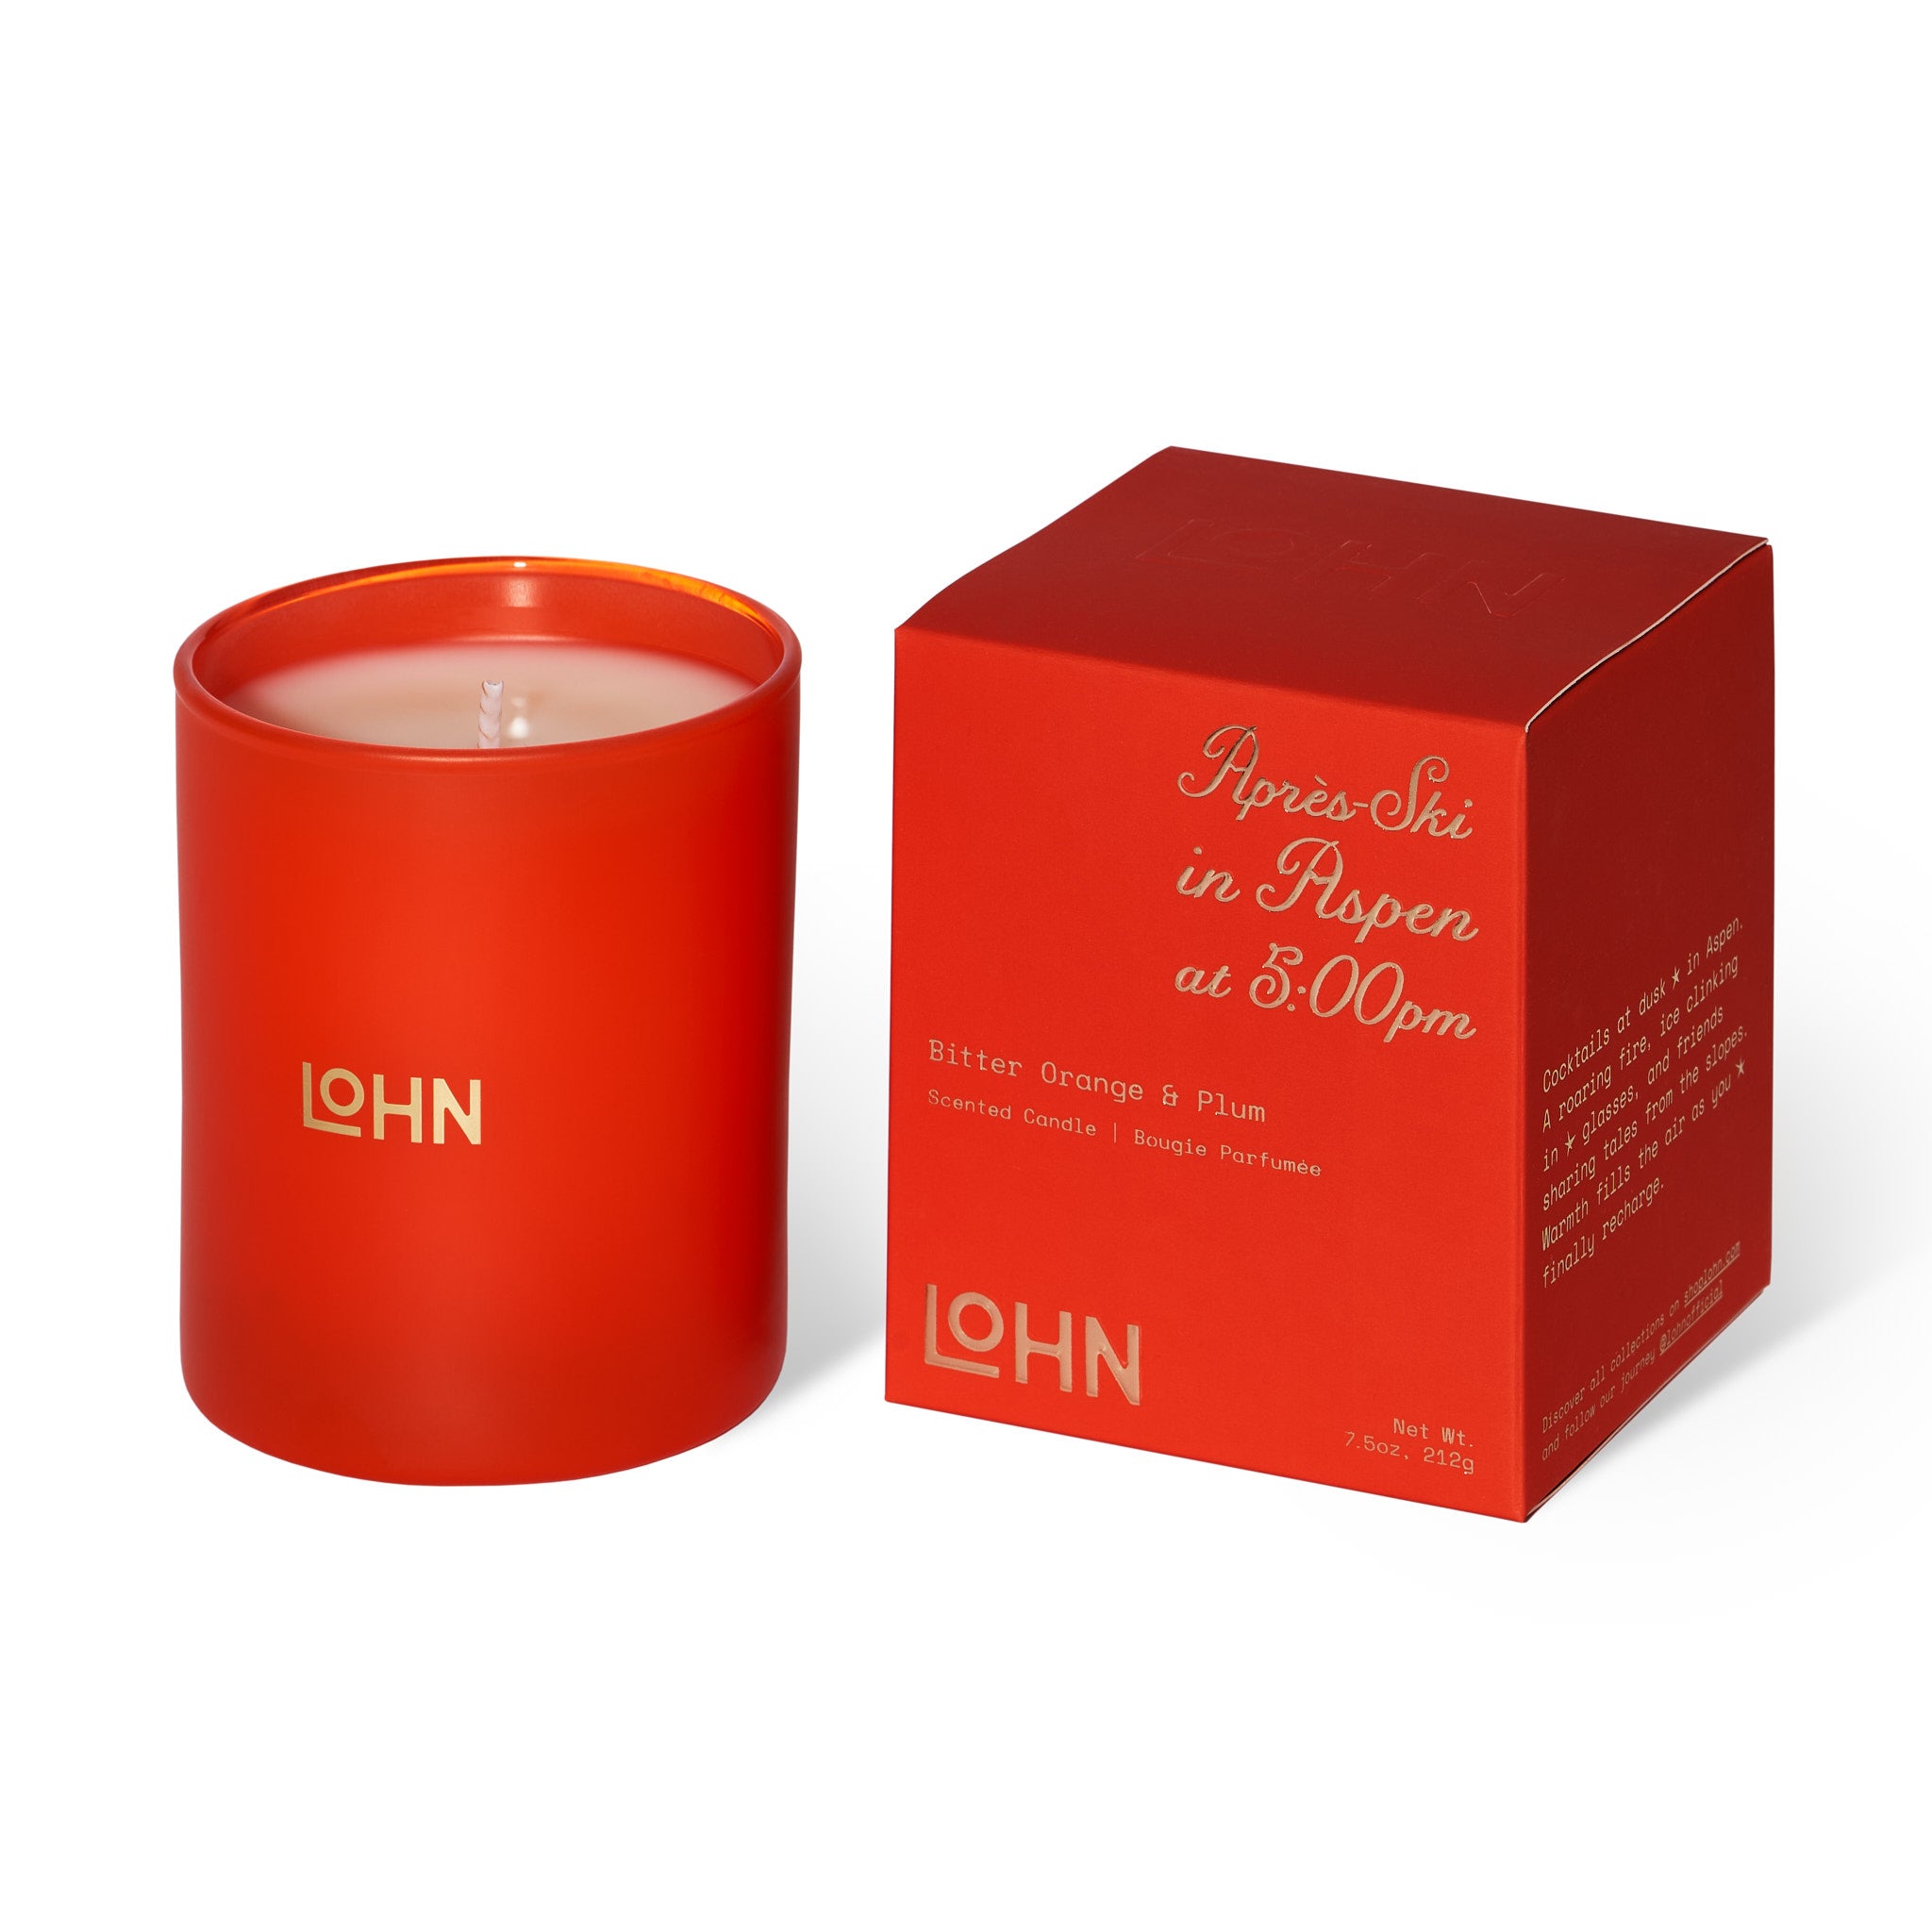 Winter Lodge Candle Collection